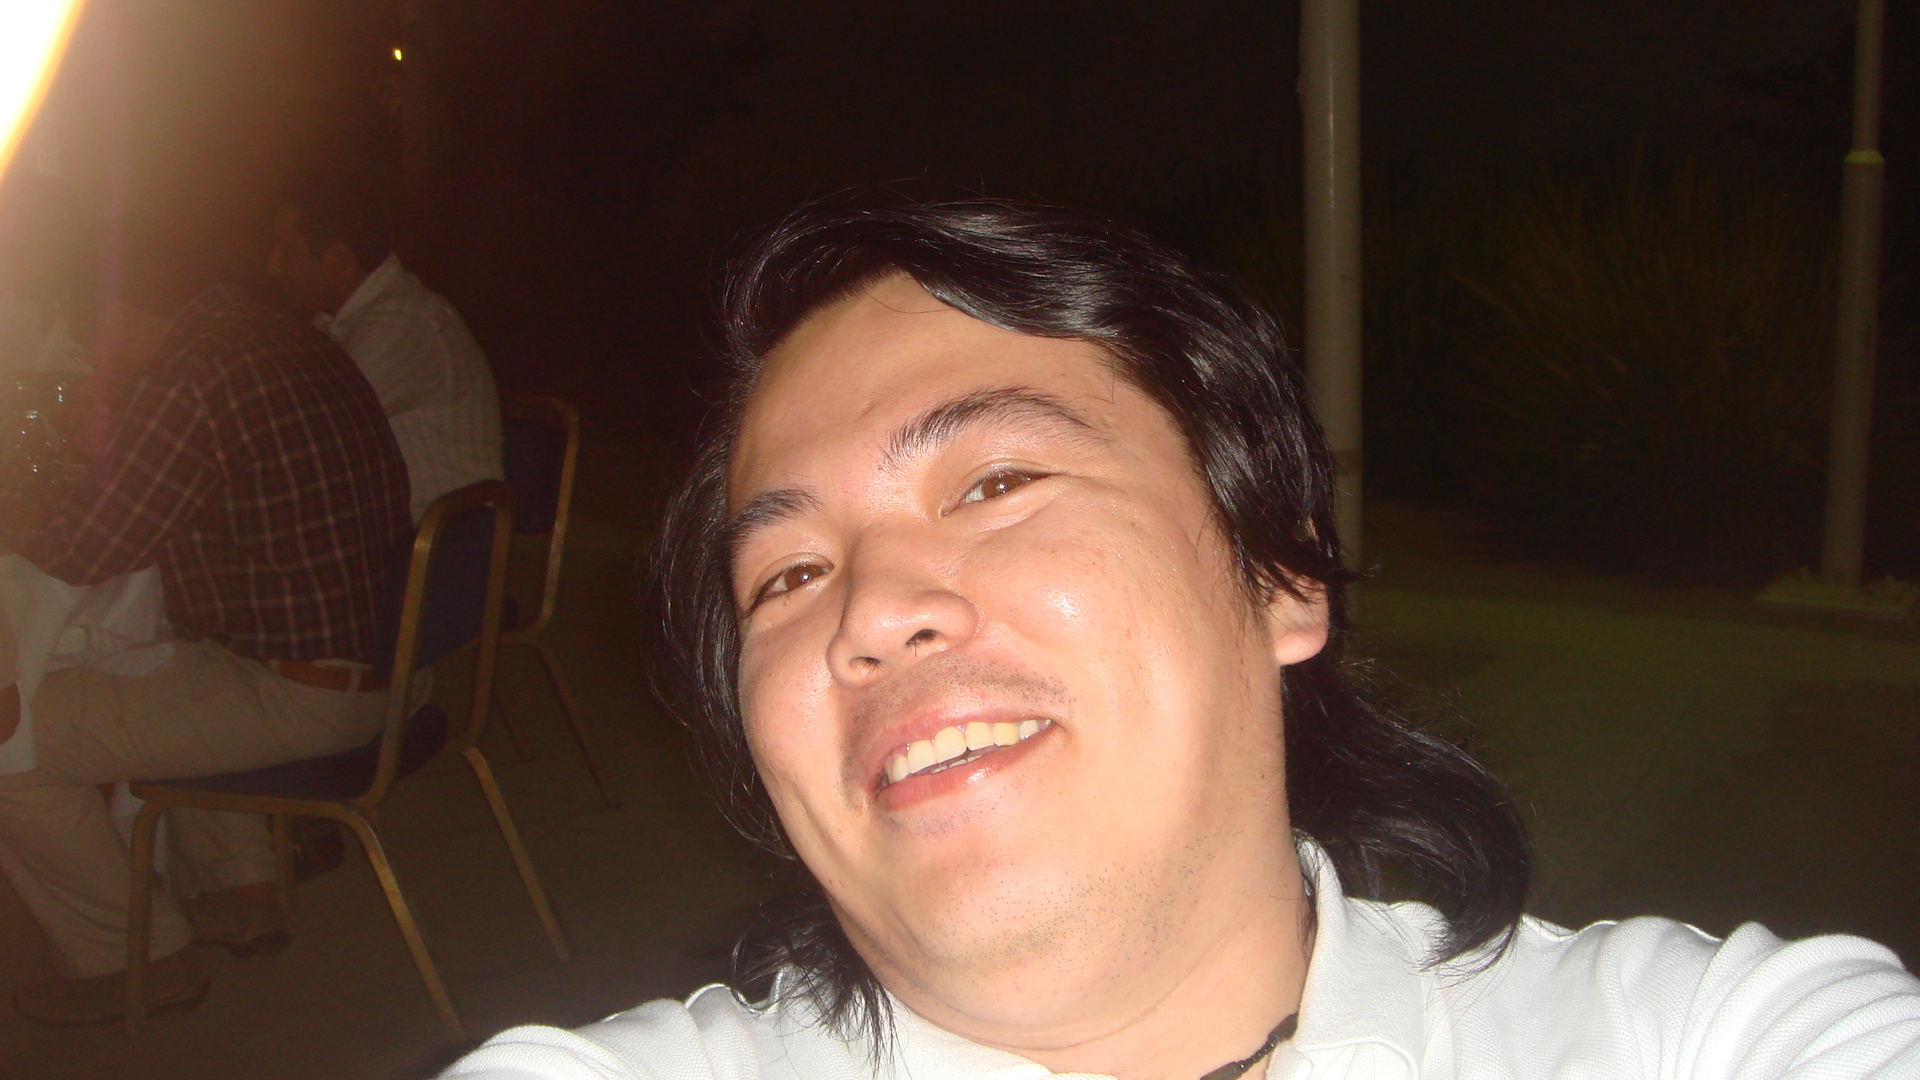 a man with black hair is smiling for the camera